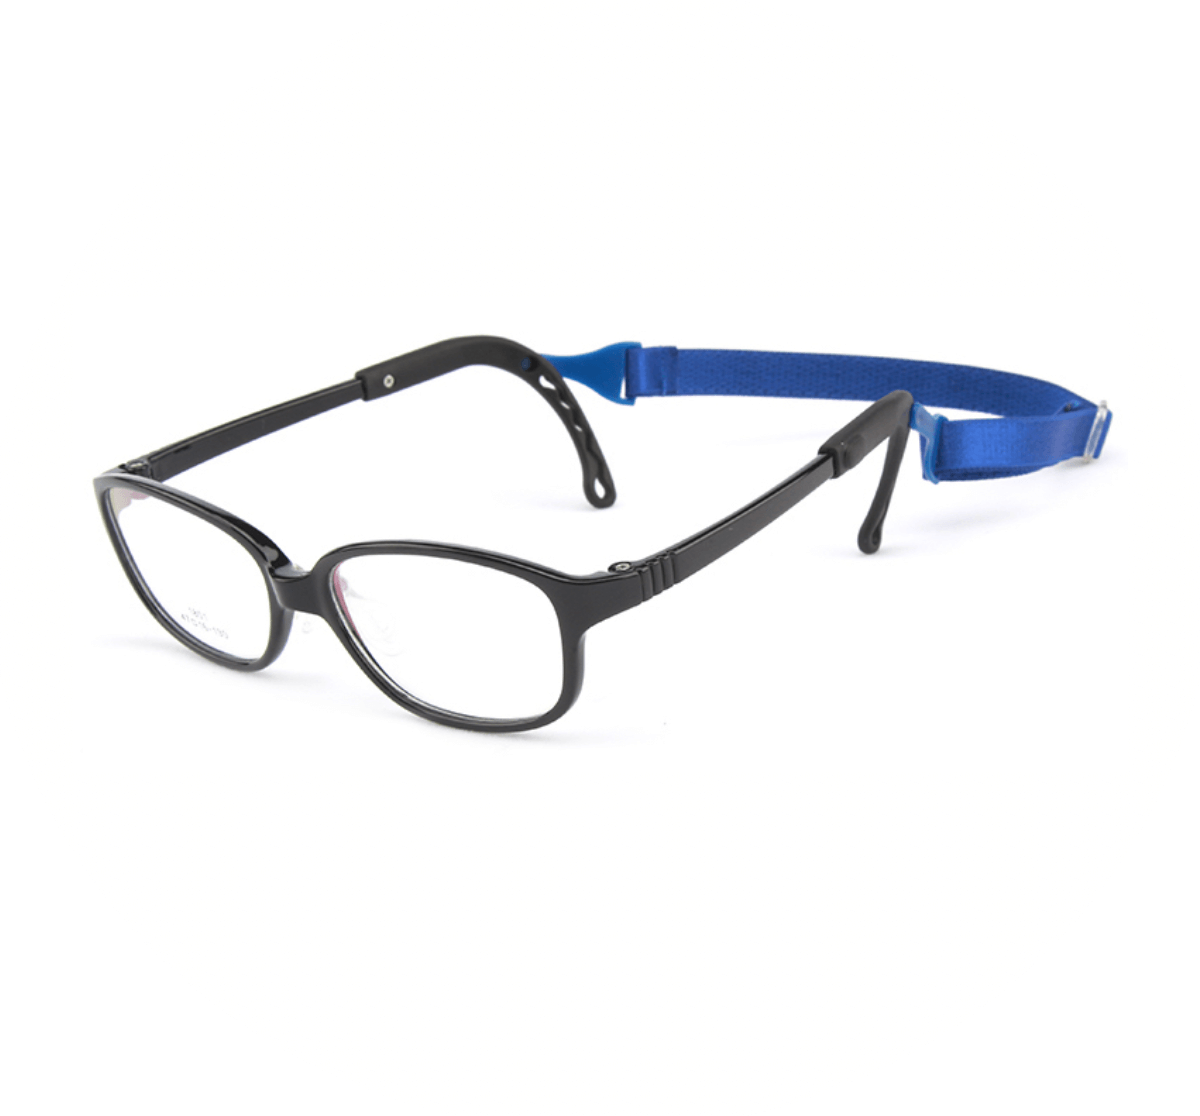 Wholesale Kid’s Optical Glasses from China - Wholesale Eyeglasses - Wholesale Eyewear Suppliers